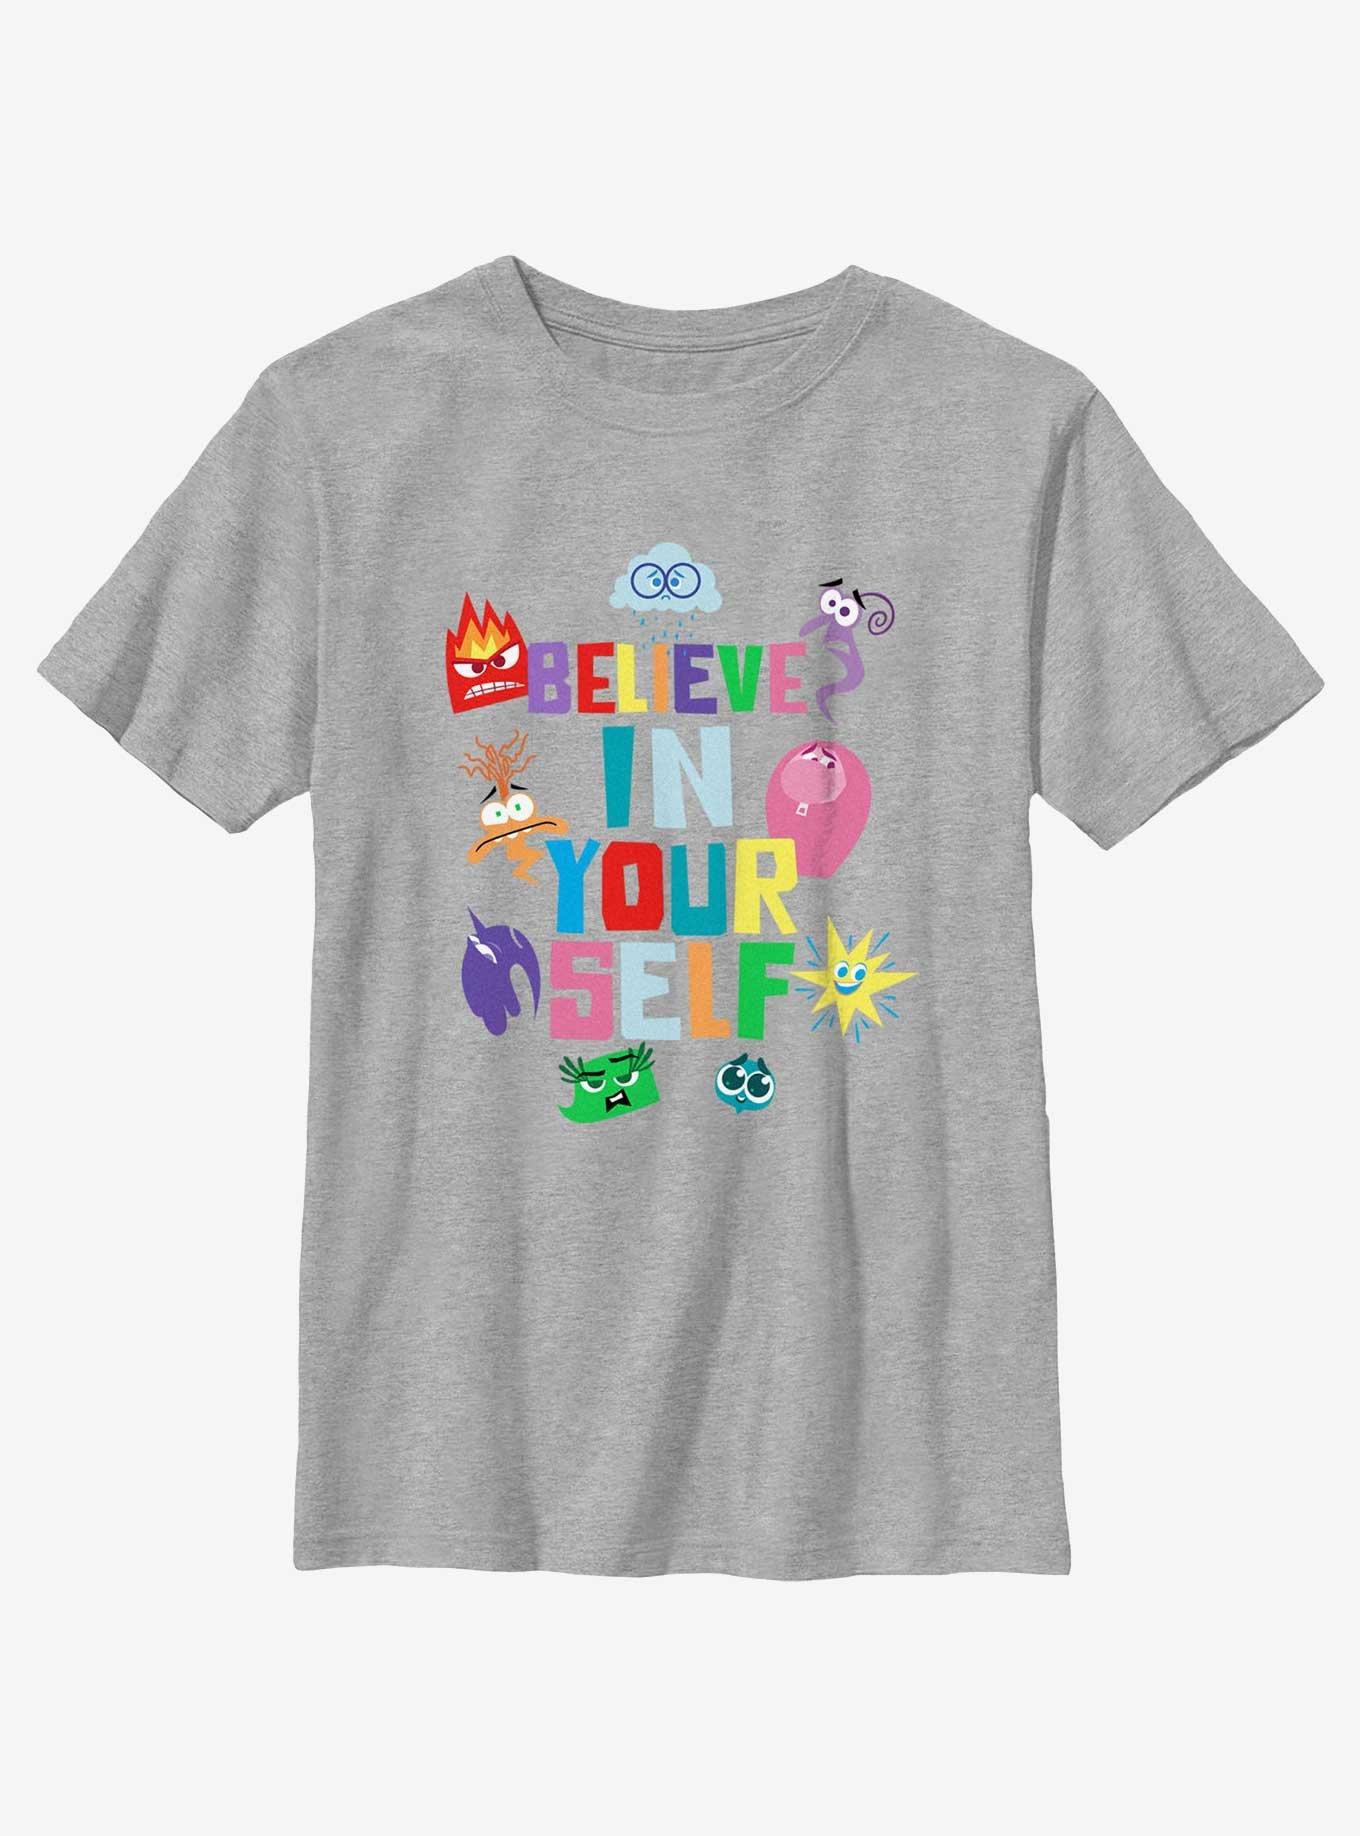 Disney Pixar Inside Out 2 Believe In Your Self Youth T-Shirt, , hi-res